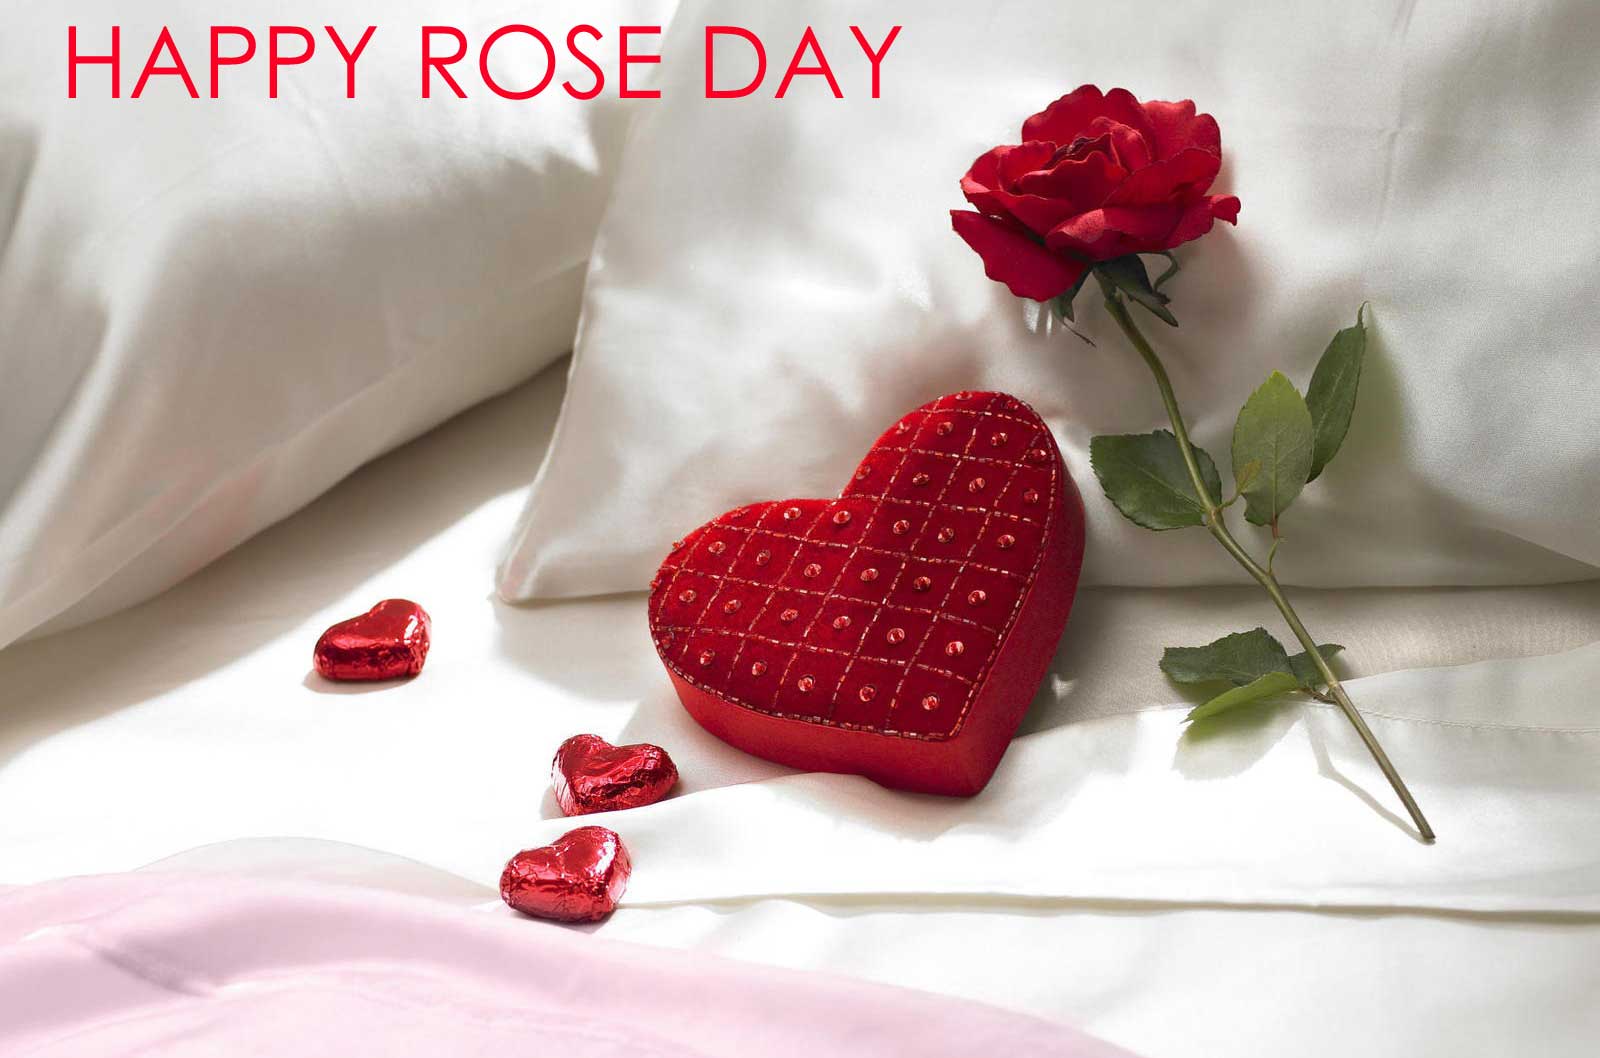 Happy Rose Day Wallpaper - Happy Rose Day 2018 - HD Wallpaper 